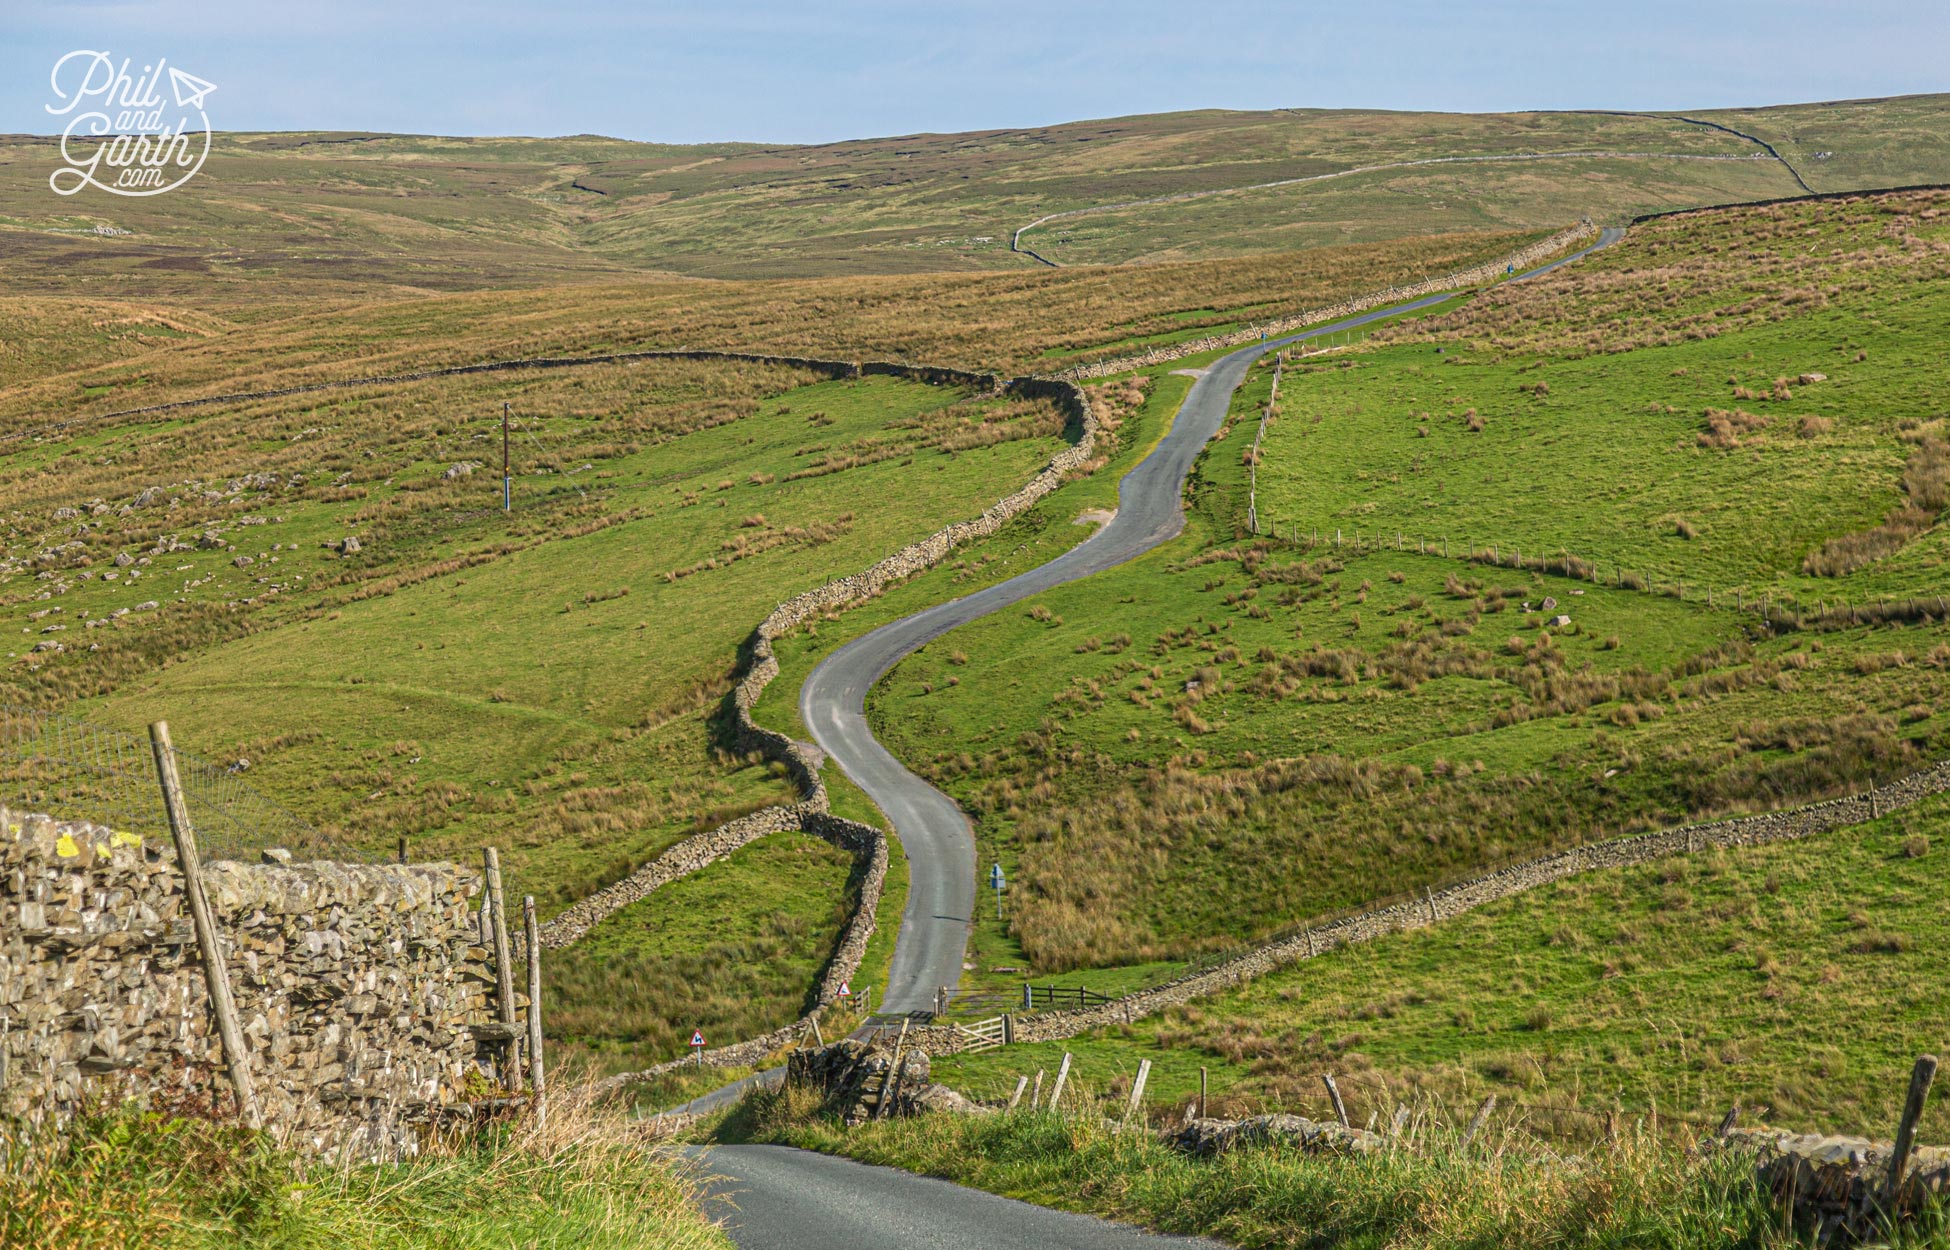 Driving across Malhamdale, best known for dramatic limestone landscapes